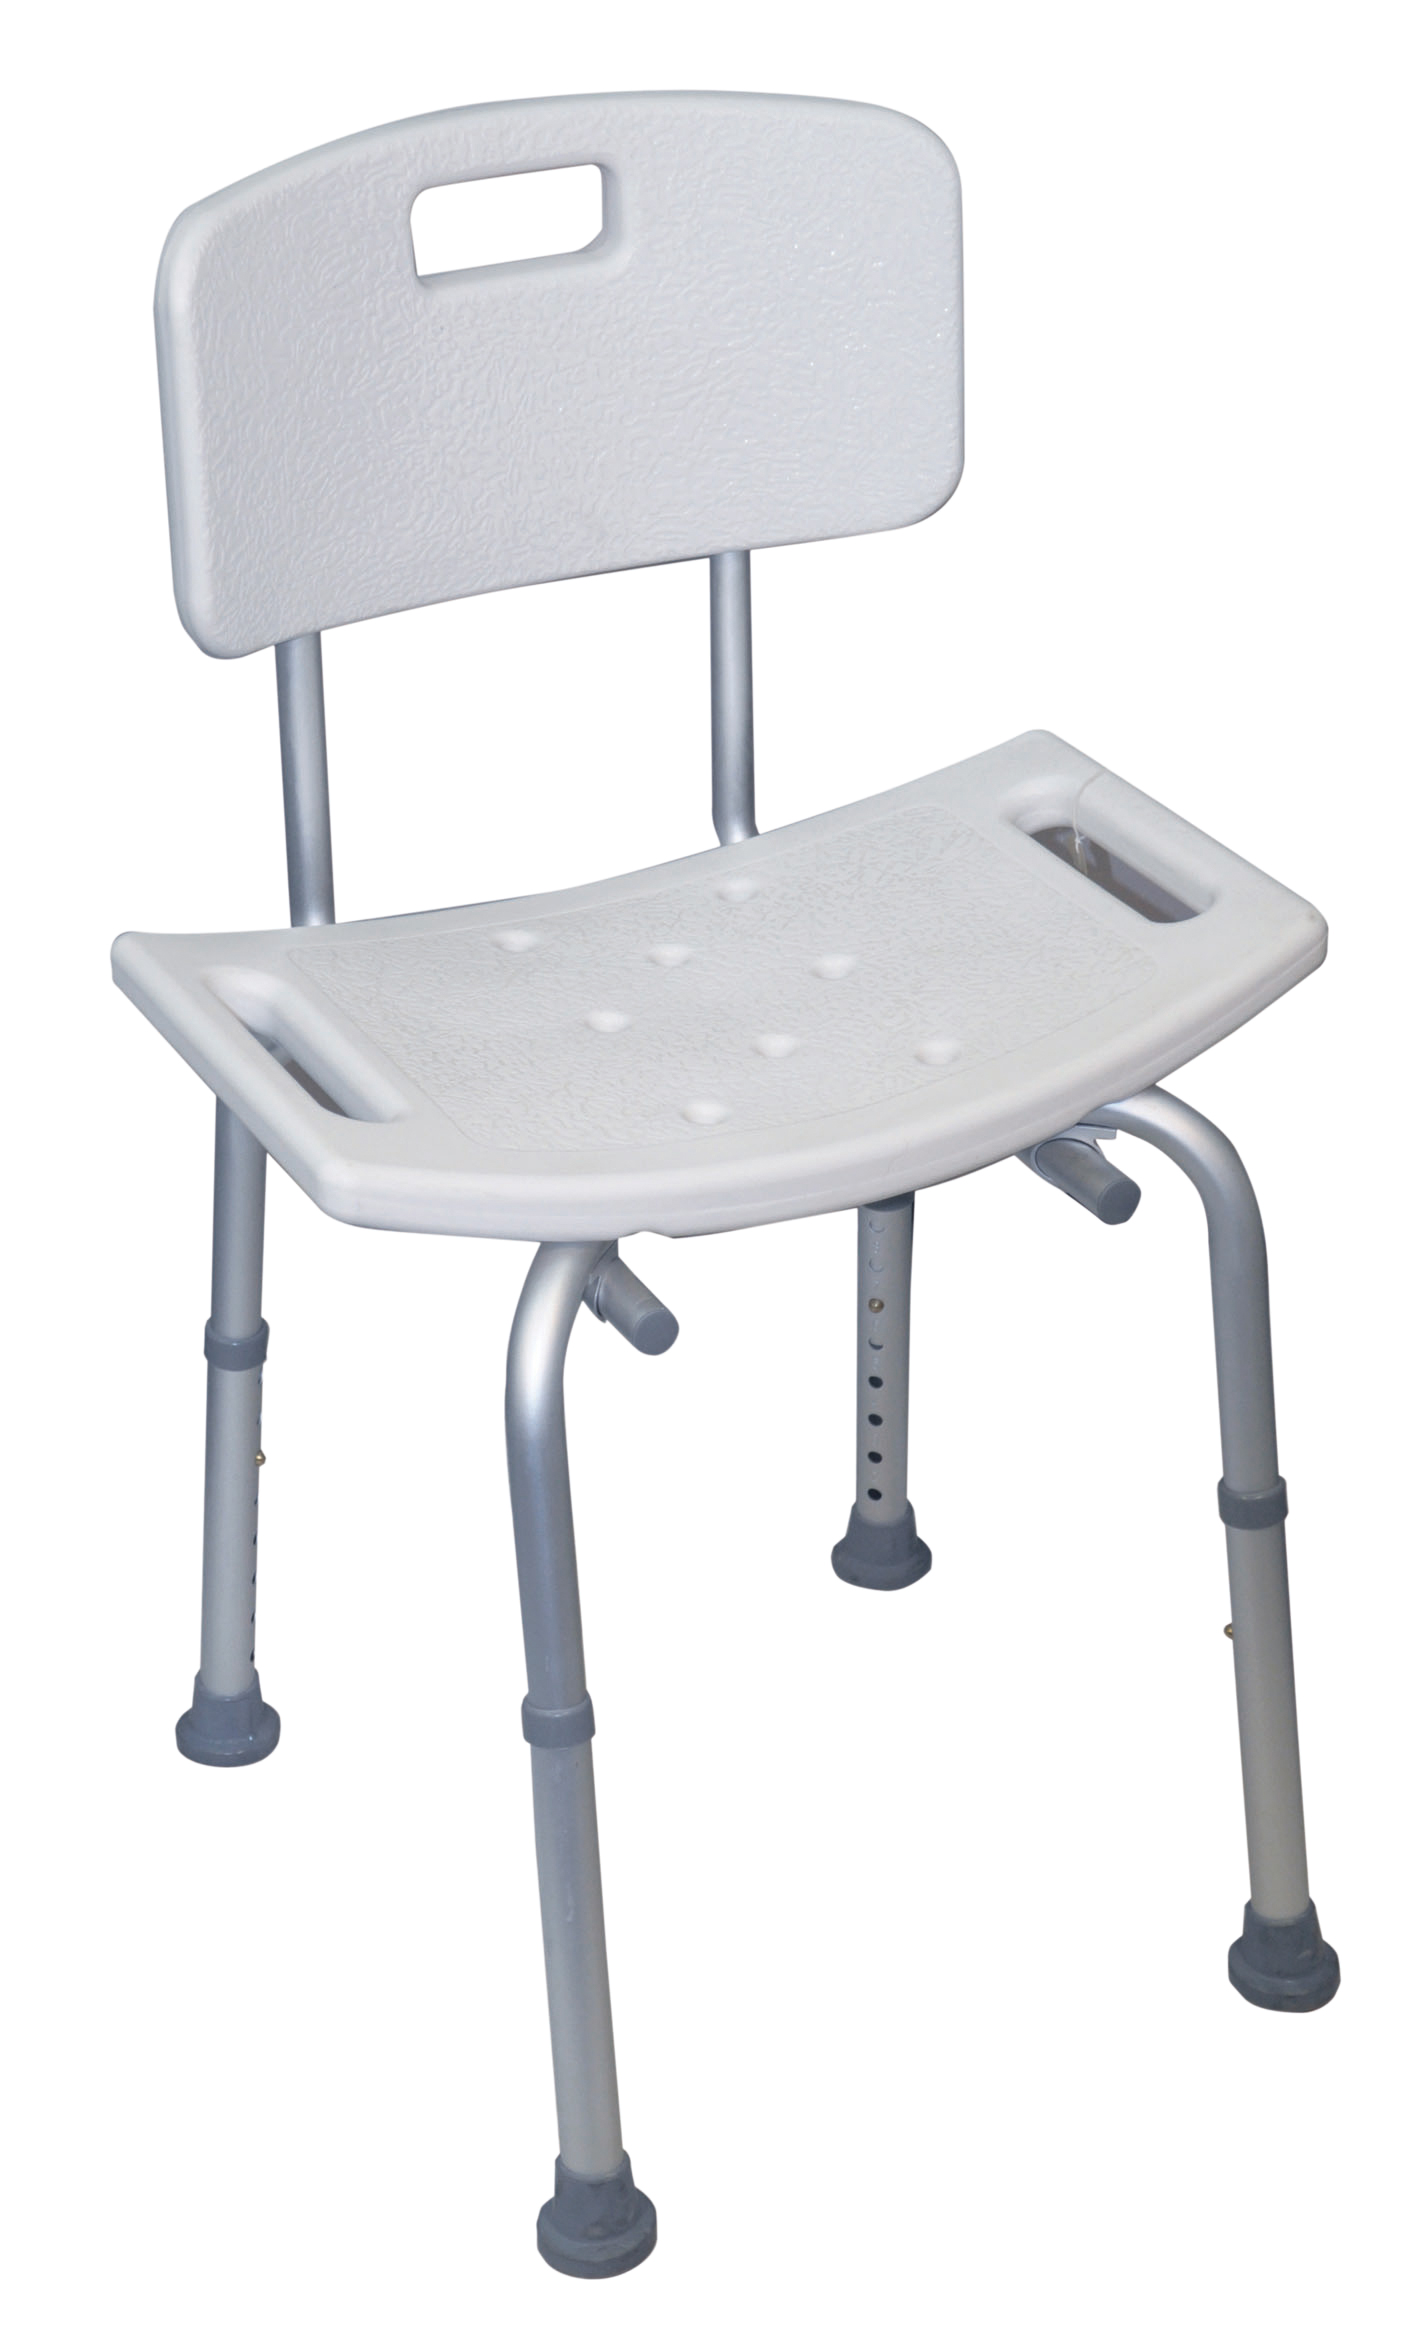 Shower Stool With Back 1